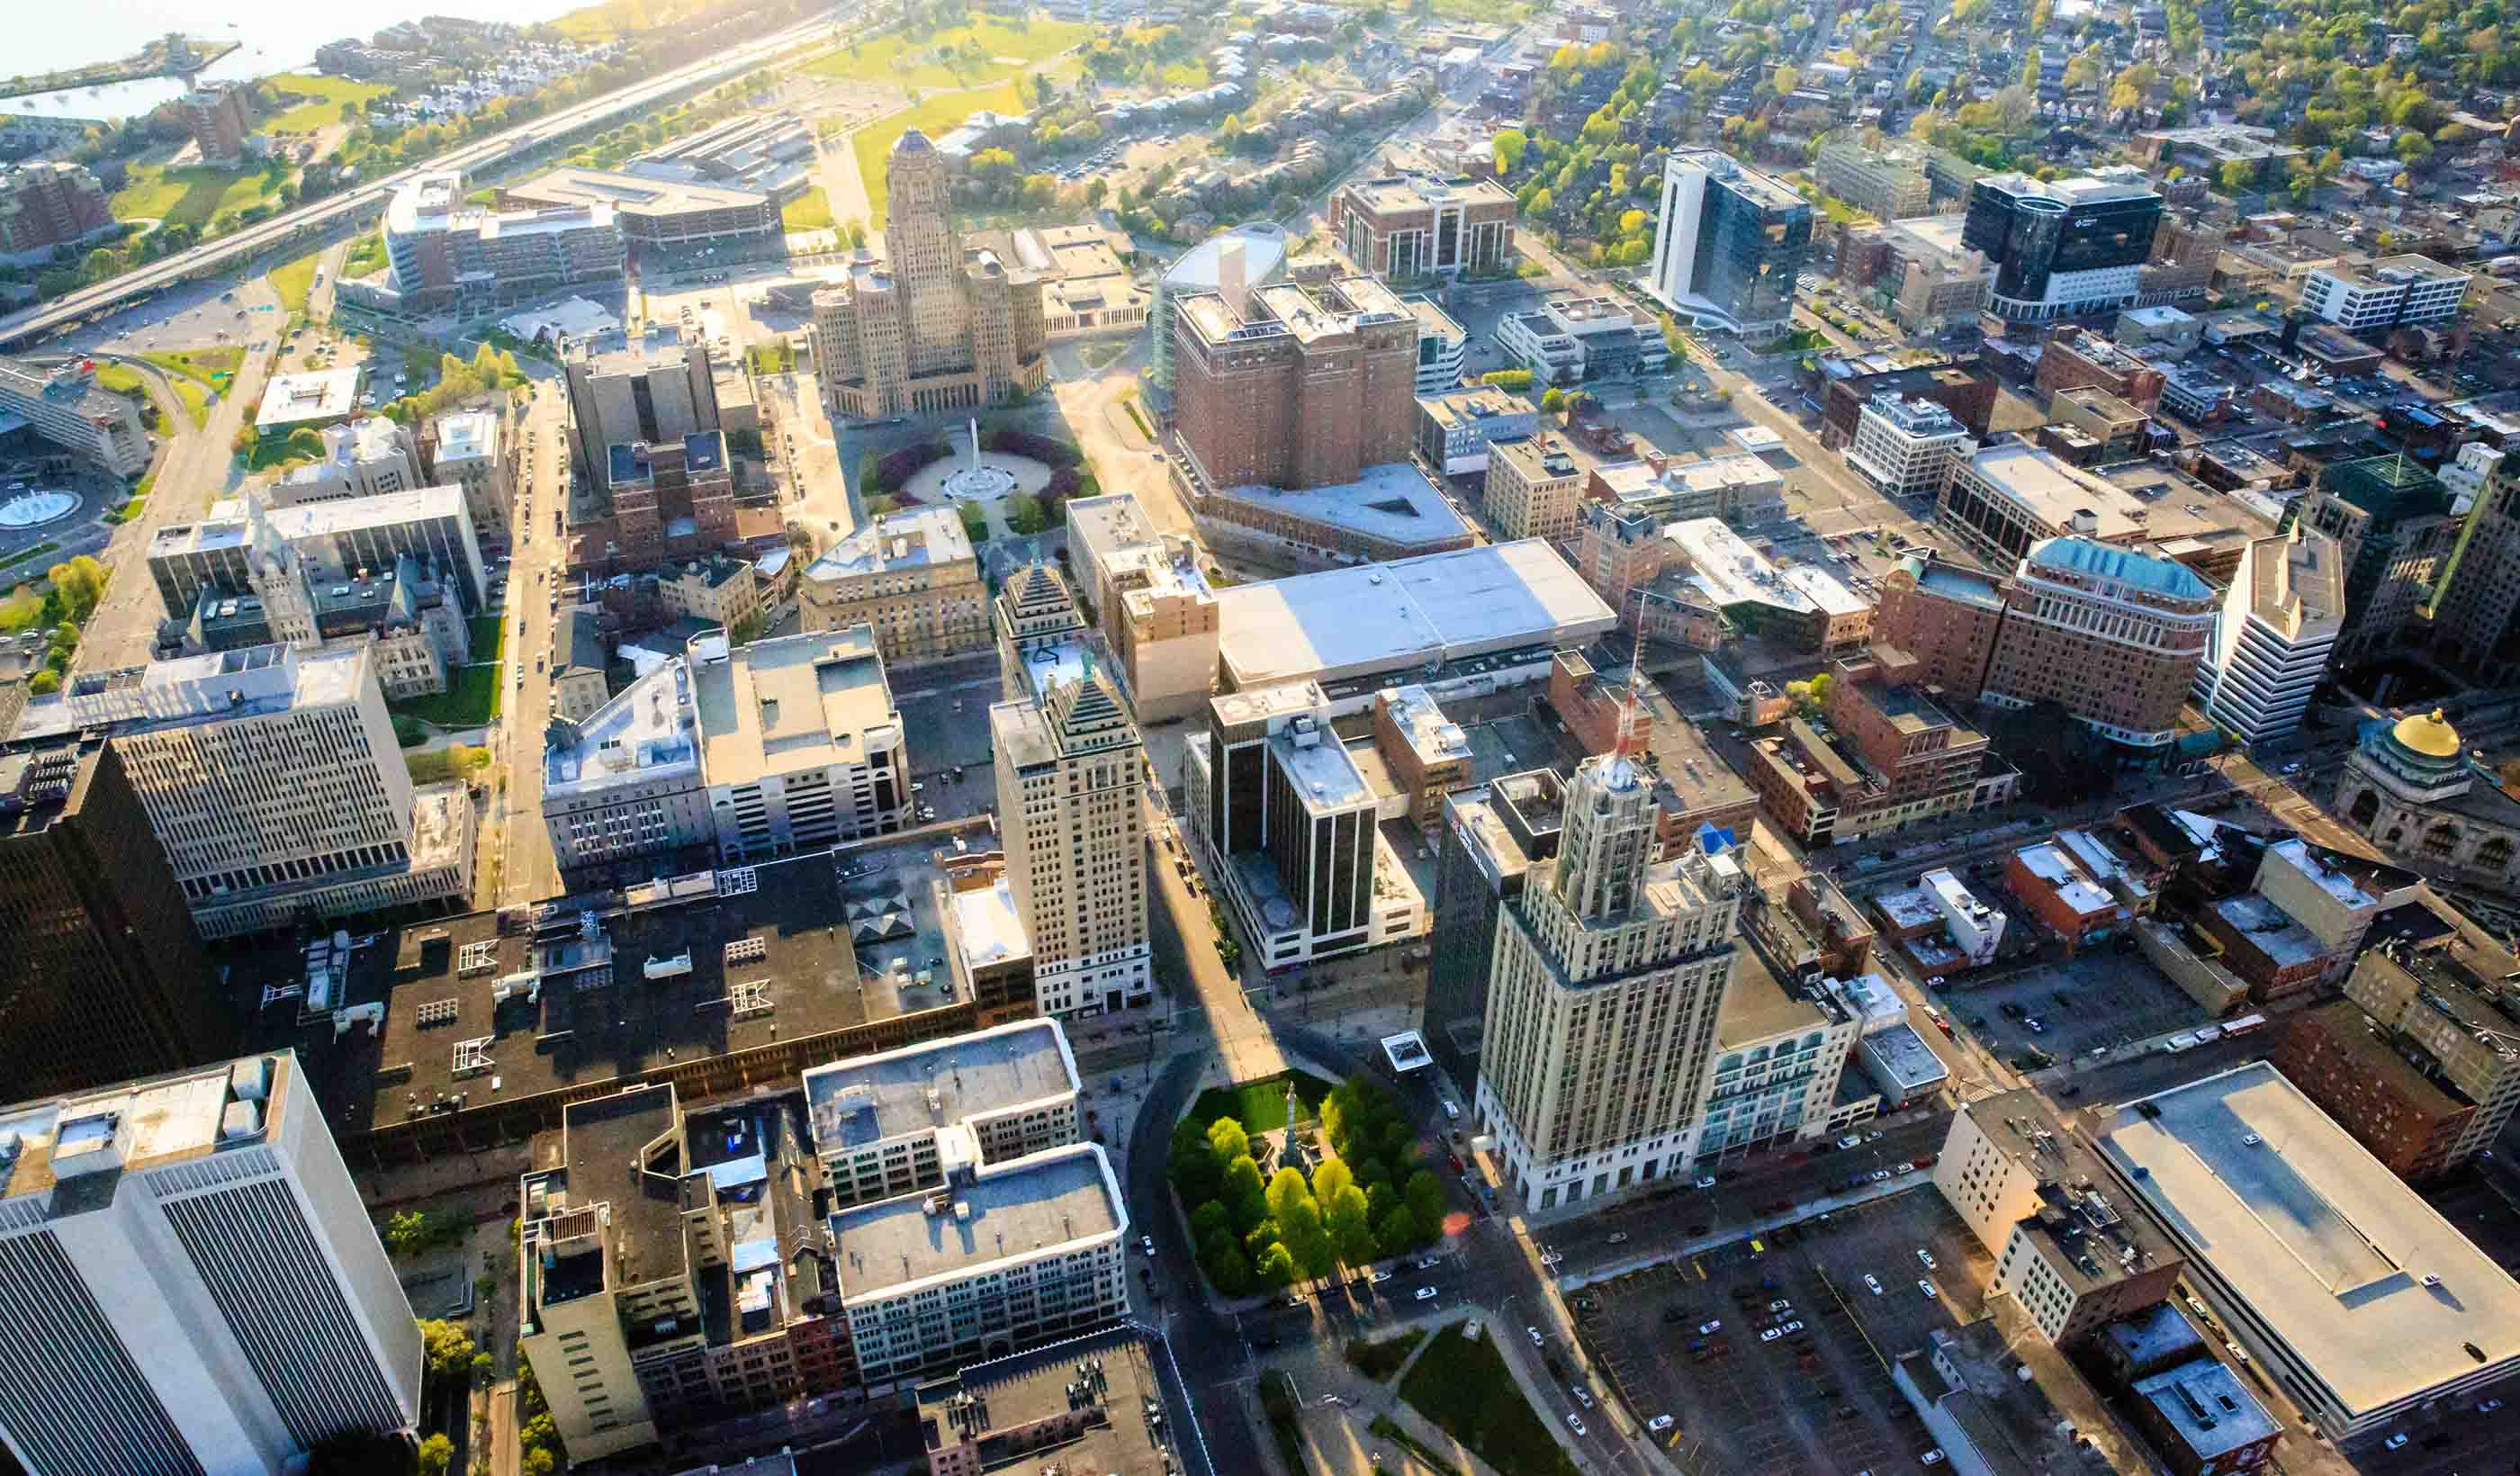 The Future of Mobility: Remaking Buffalo for the 21st Century